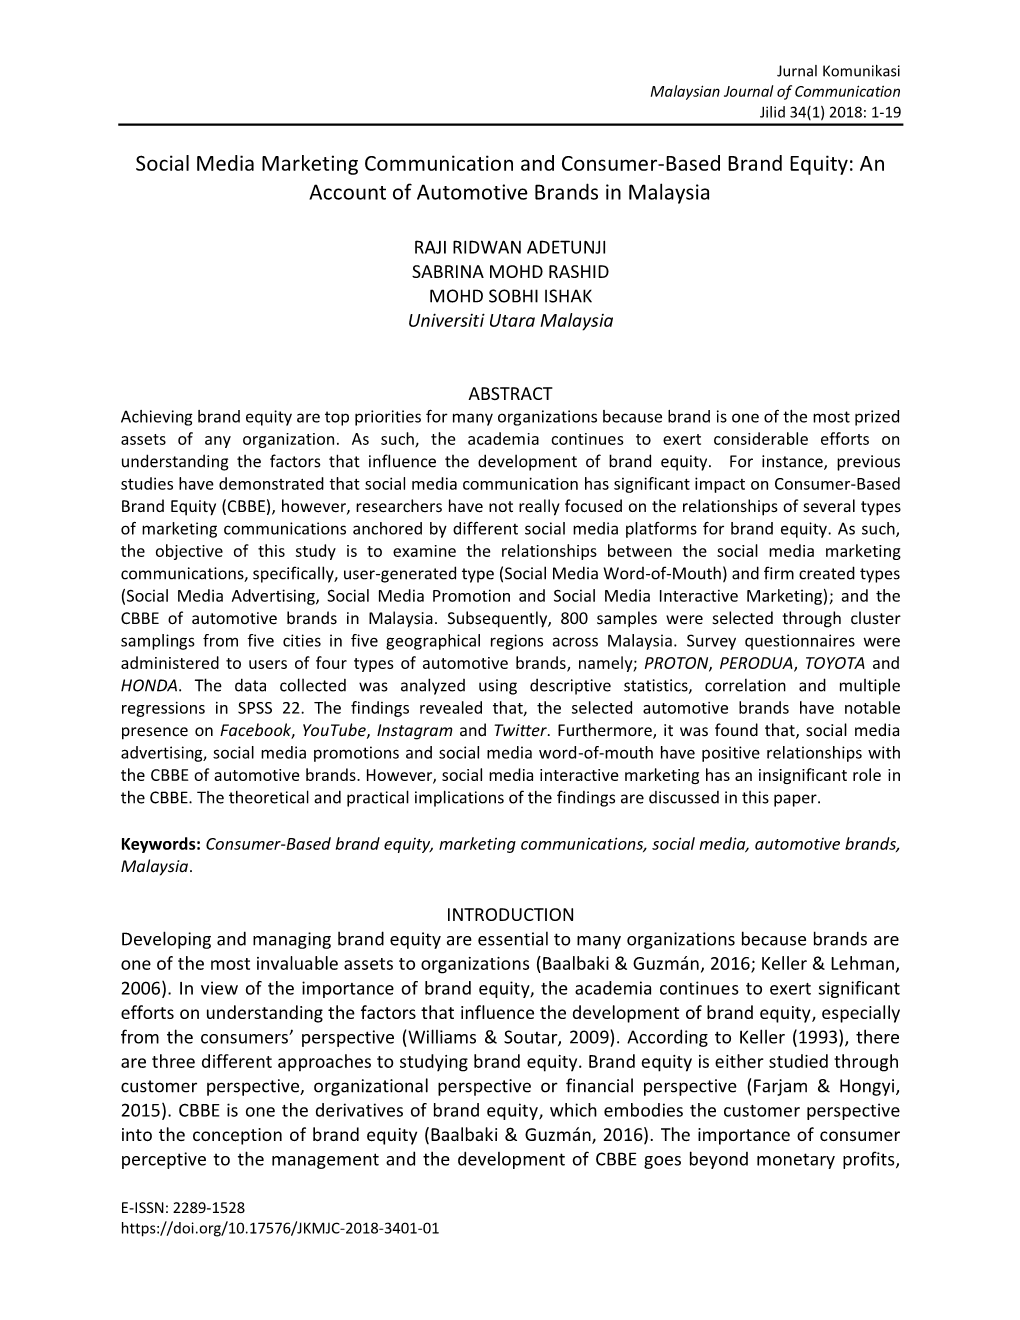 Social Media Marketing Communication and Consumer-Based Brand Equity: an Account of Automotive Brands in Malaysia